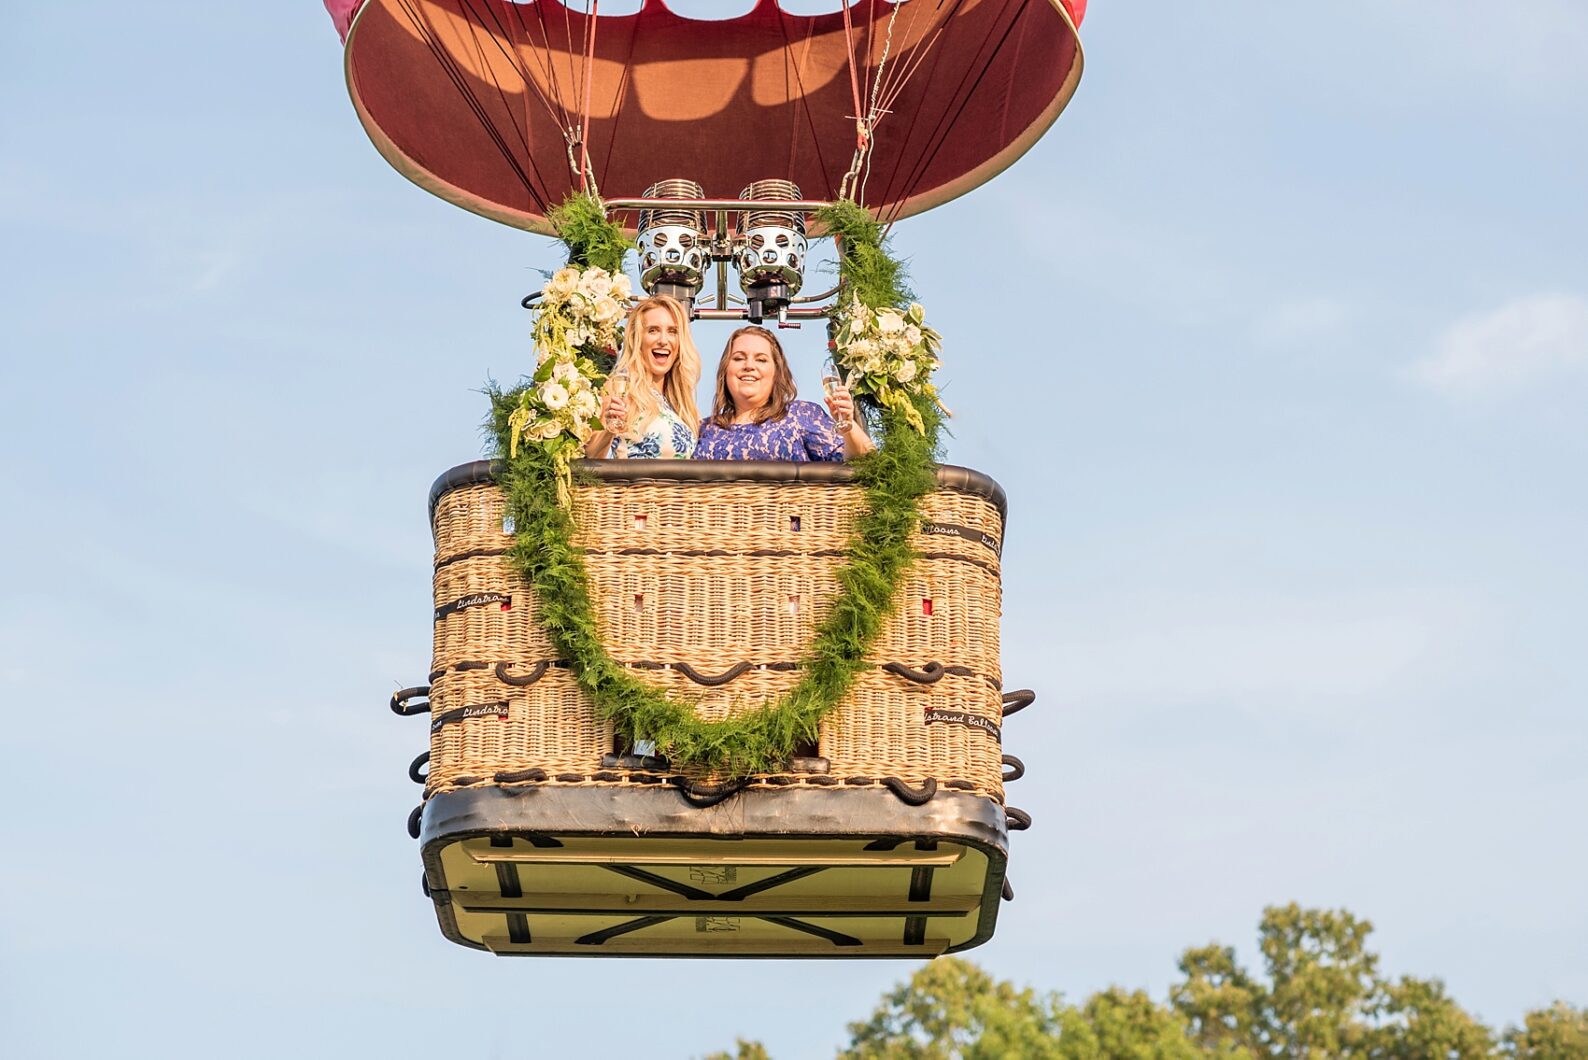 Bennett Bunn Plantation hot air balloon flower field images by Mikkel Paige, Raleigh wedding photographer. Flowers by SE Floral Designs.